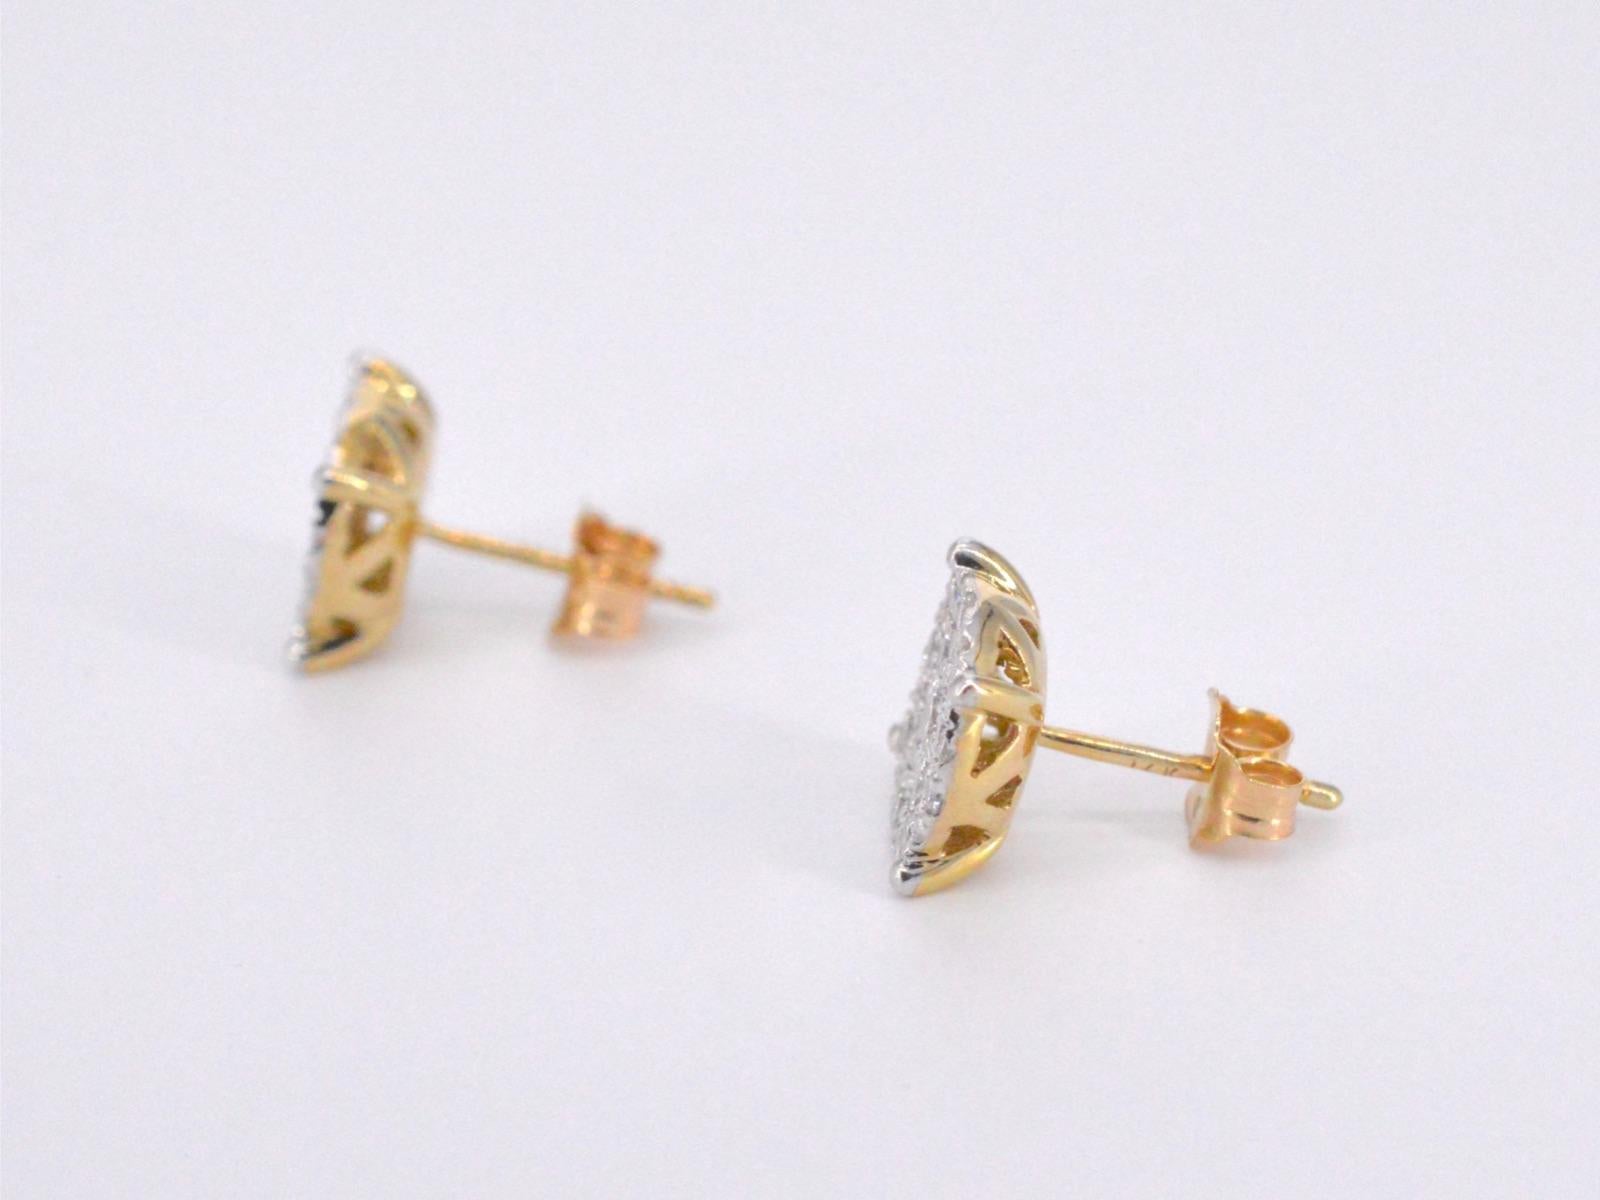 Gold Earrings with a Brilliant Cut Diamond For Sale 2